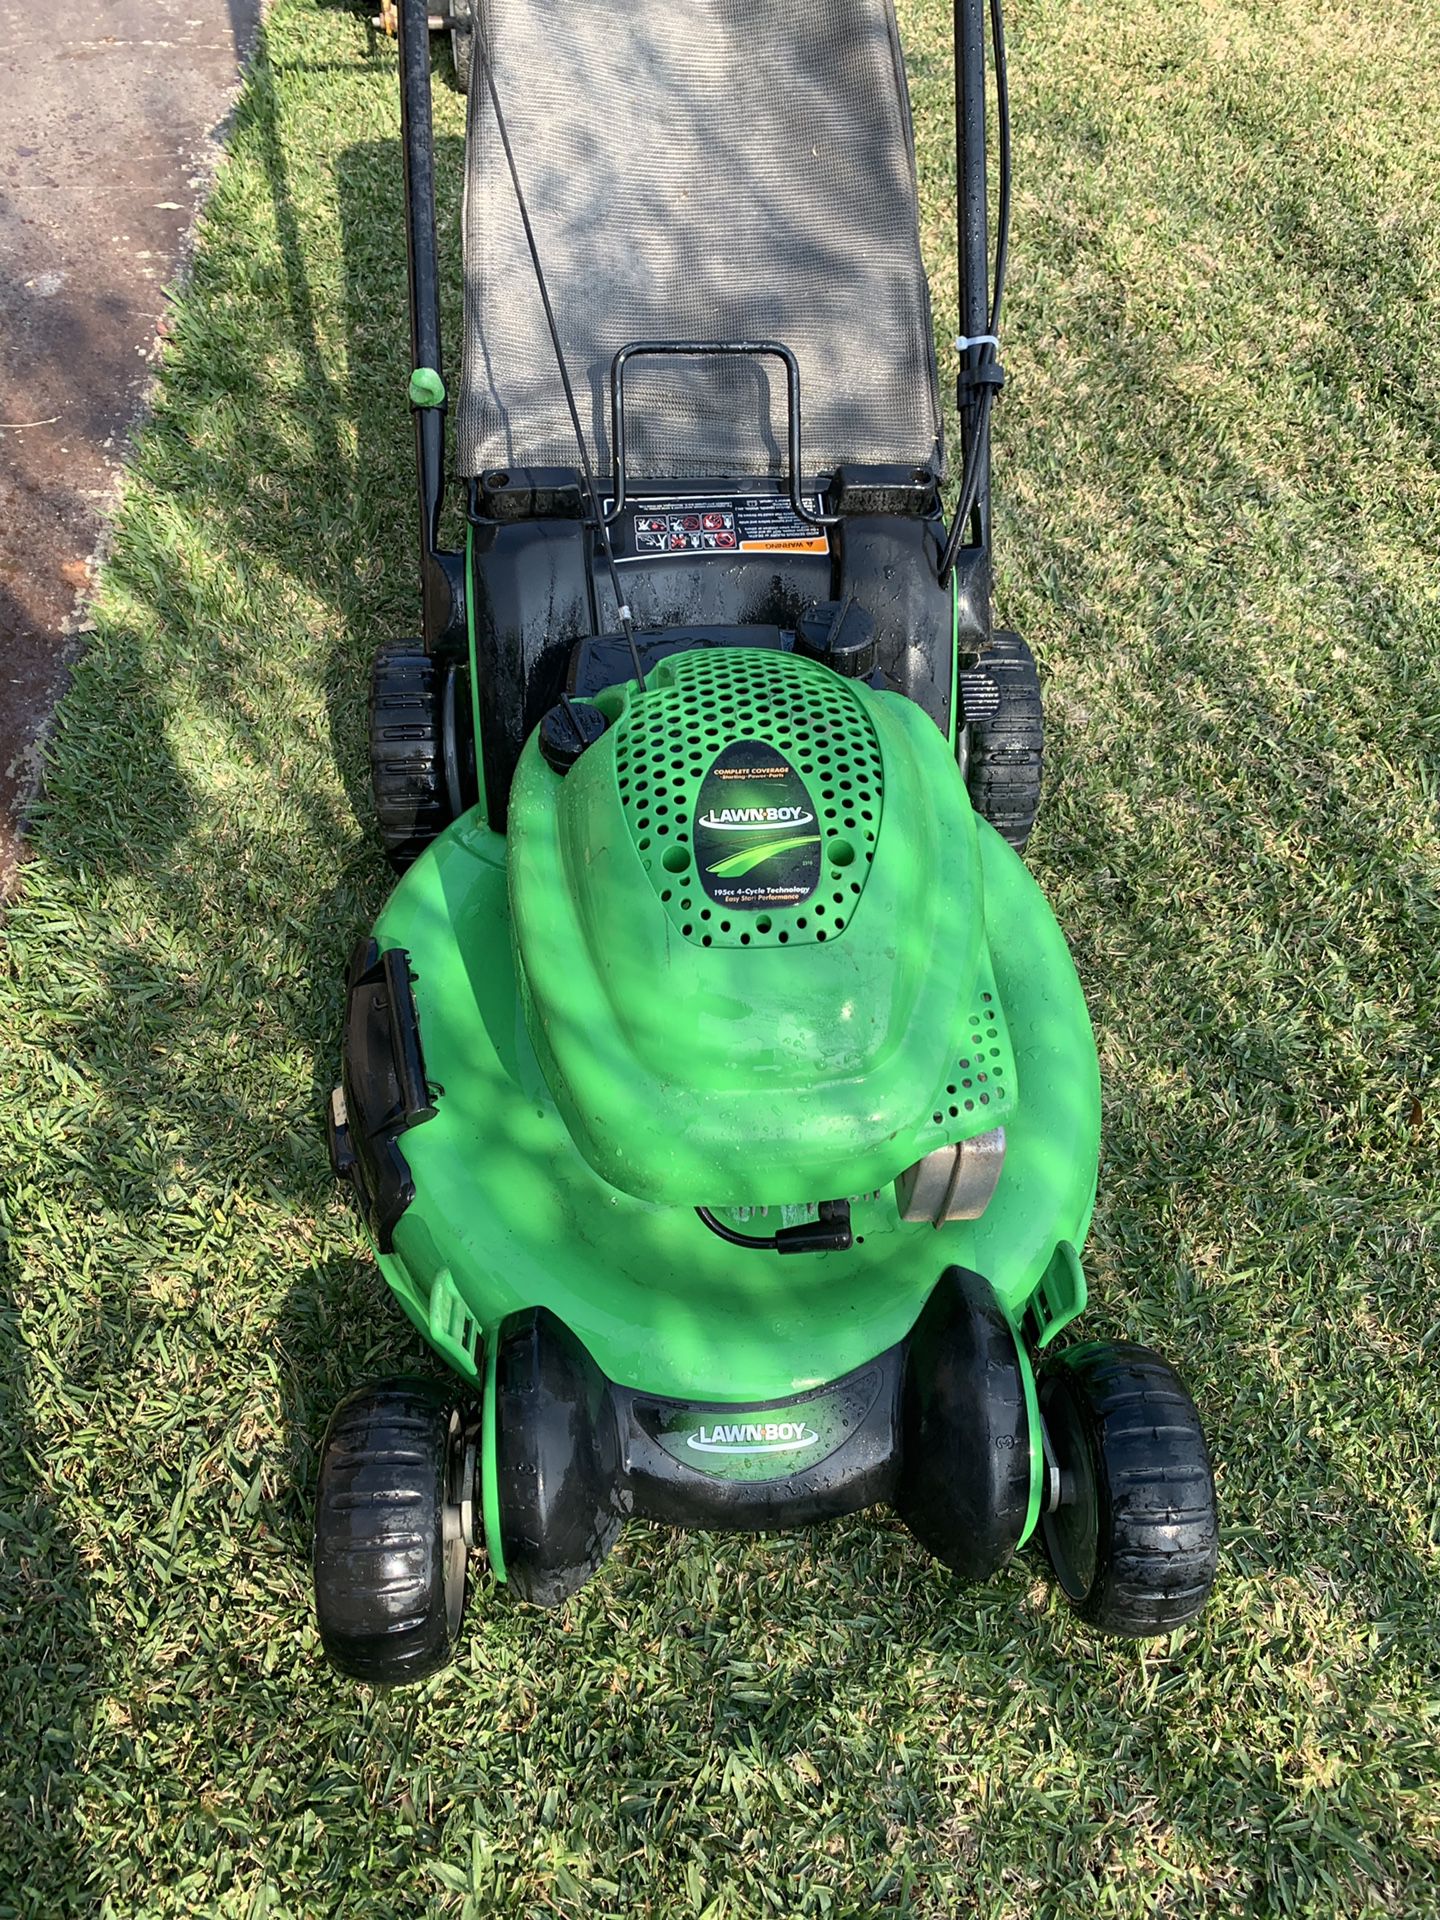 Self propelled lawn mower $140 works perfect